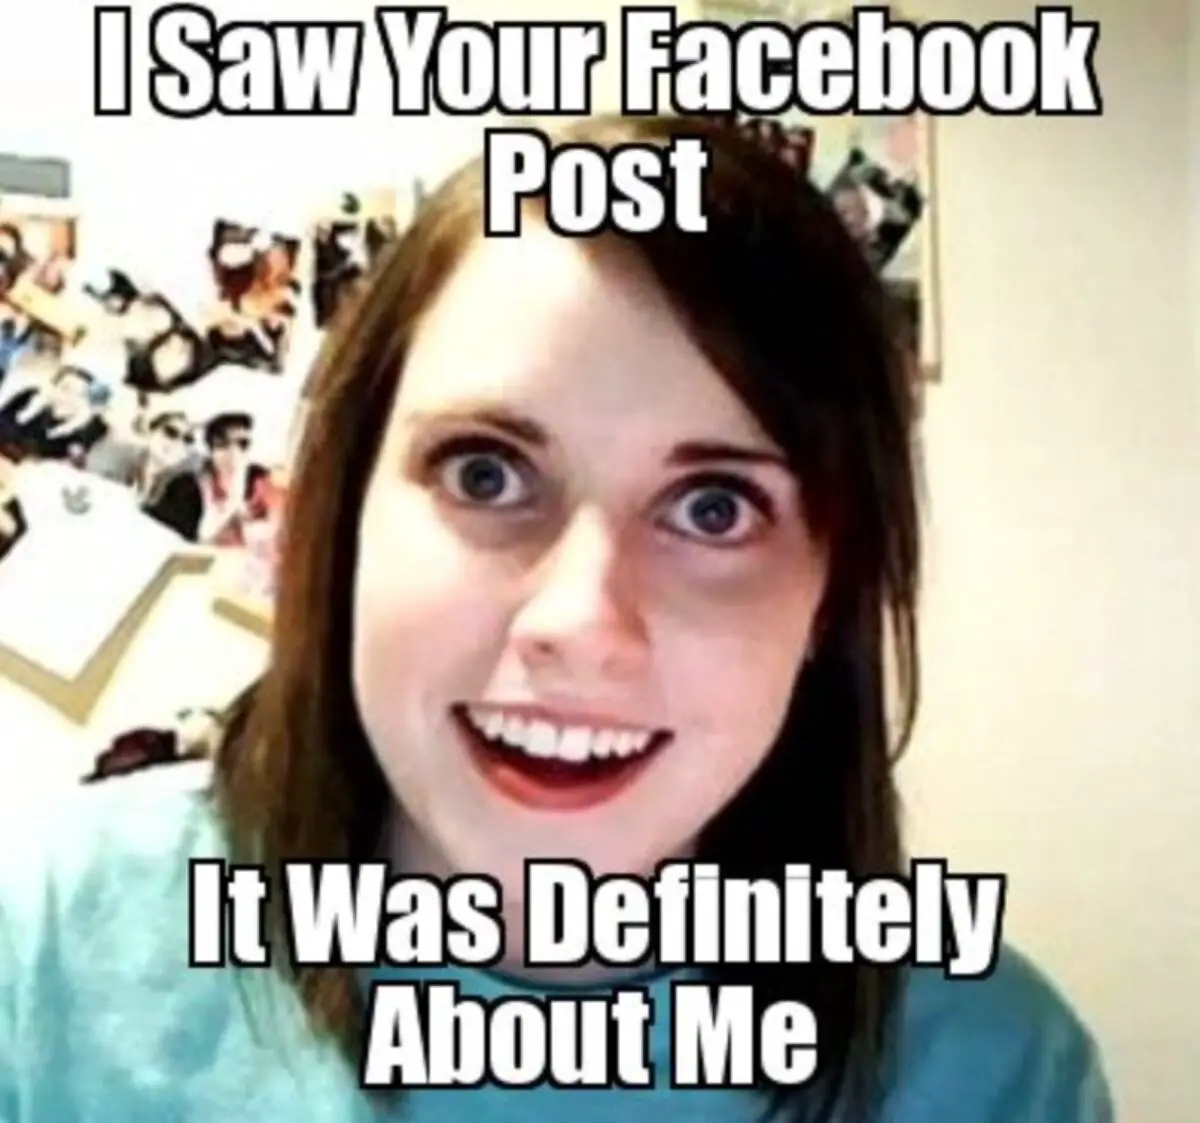 111 Funny Facebook Status & Posts - Appamatix - All About Apps